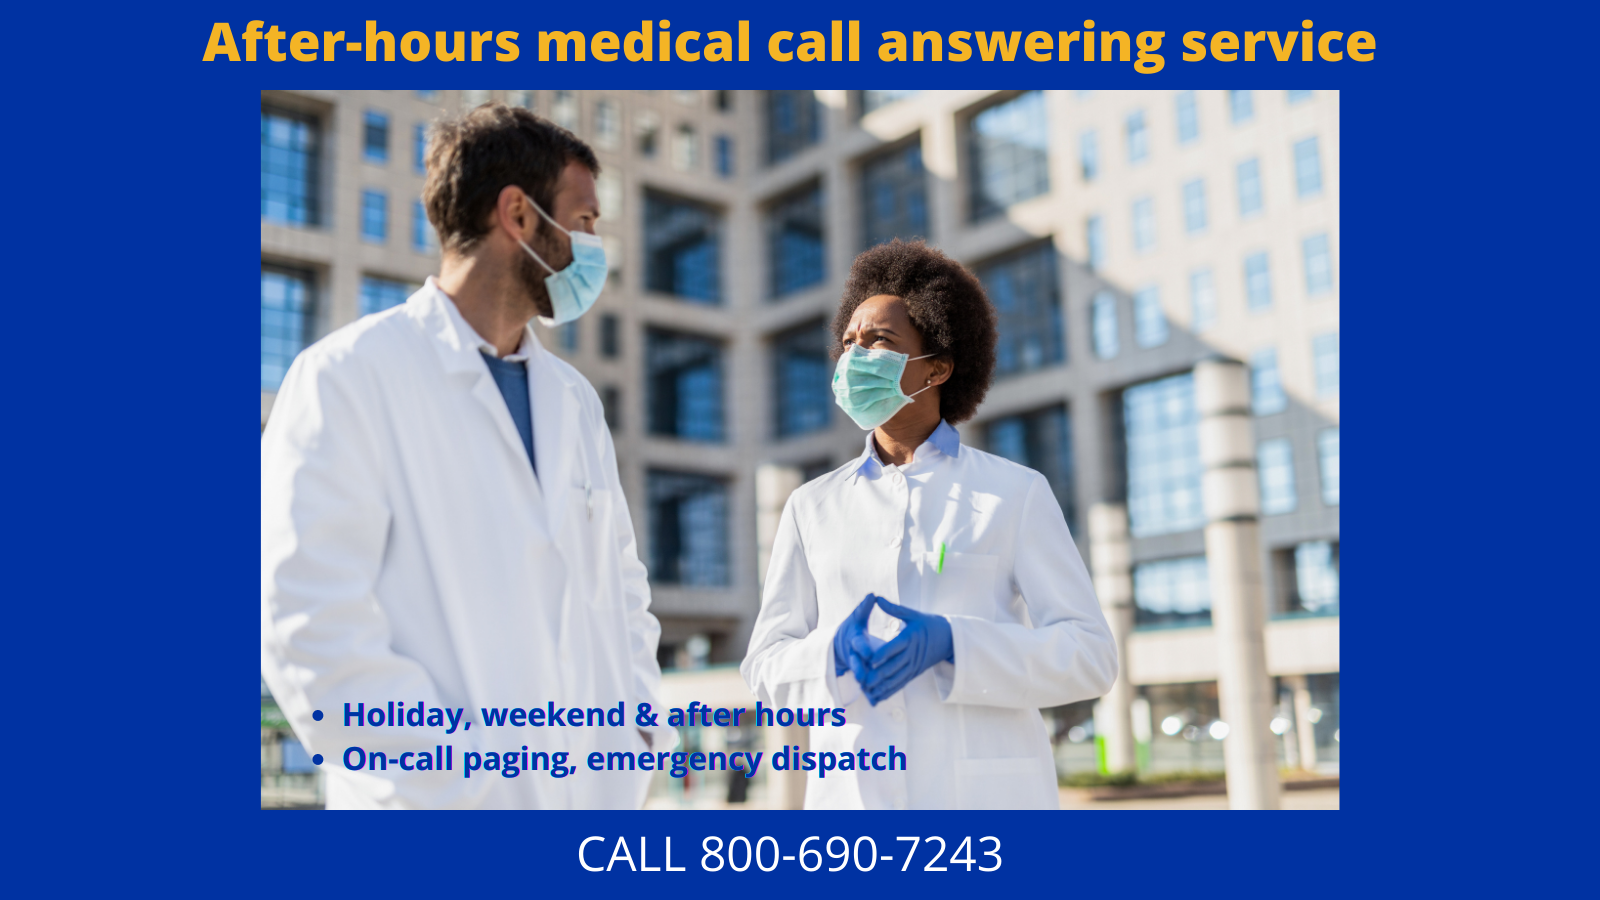 medical-call-answering-service-after-hours-holidays-weekends